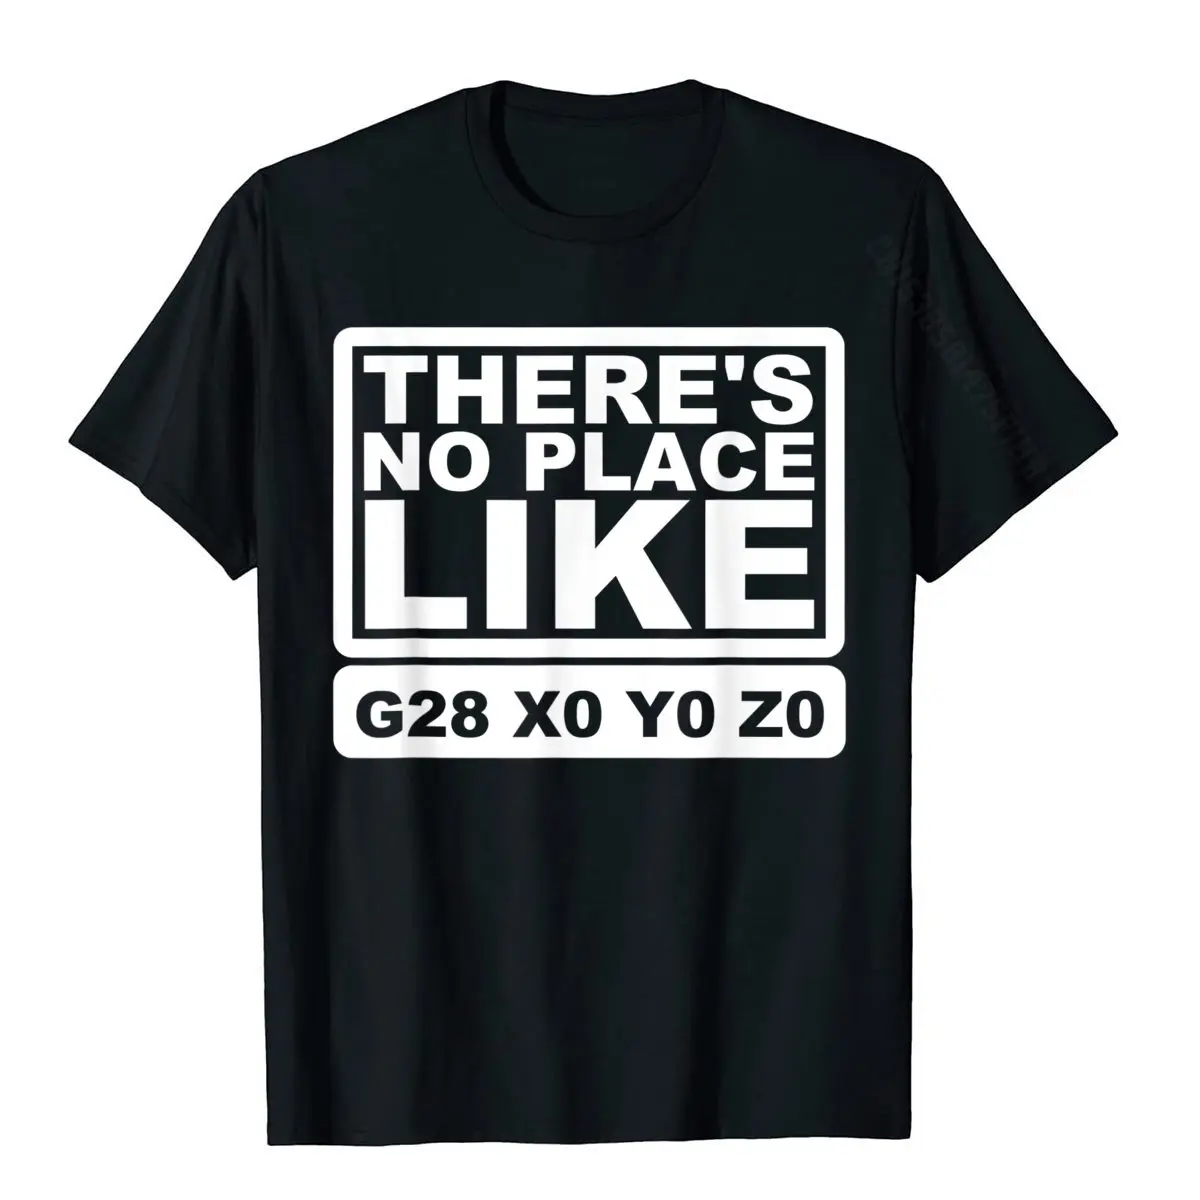 Funny CNC Machinist There's No Place Like G28 X0 Y0 Z0 Shirt Top T-Shirts For Men Design Tops & Tees New Arrival Comics Cotton